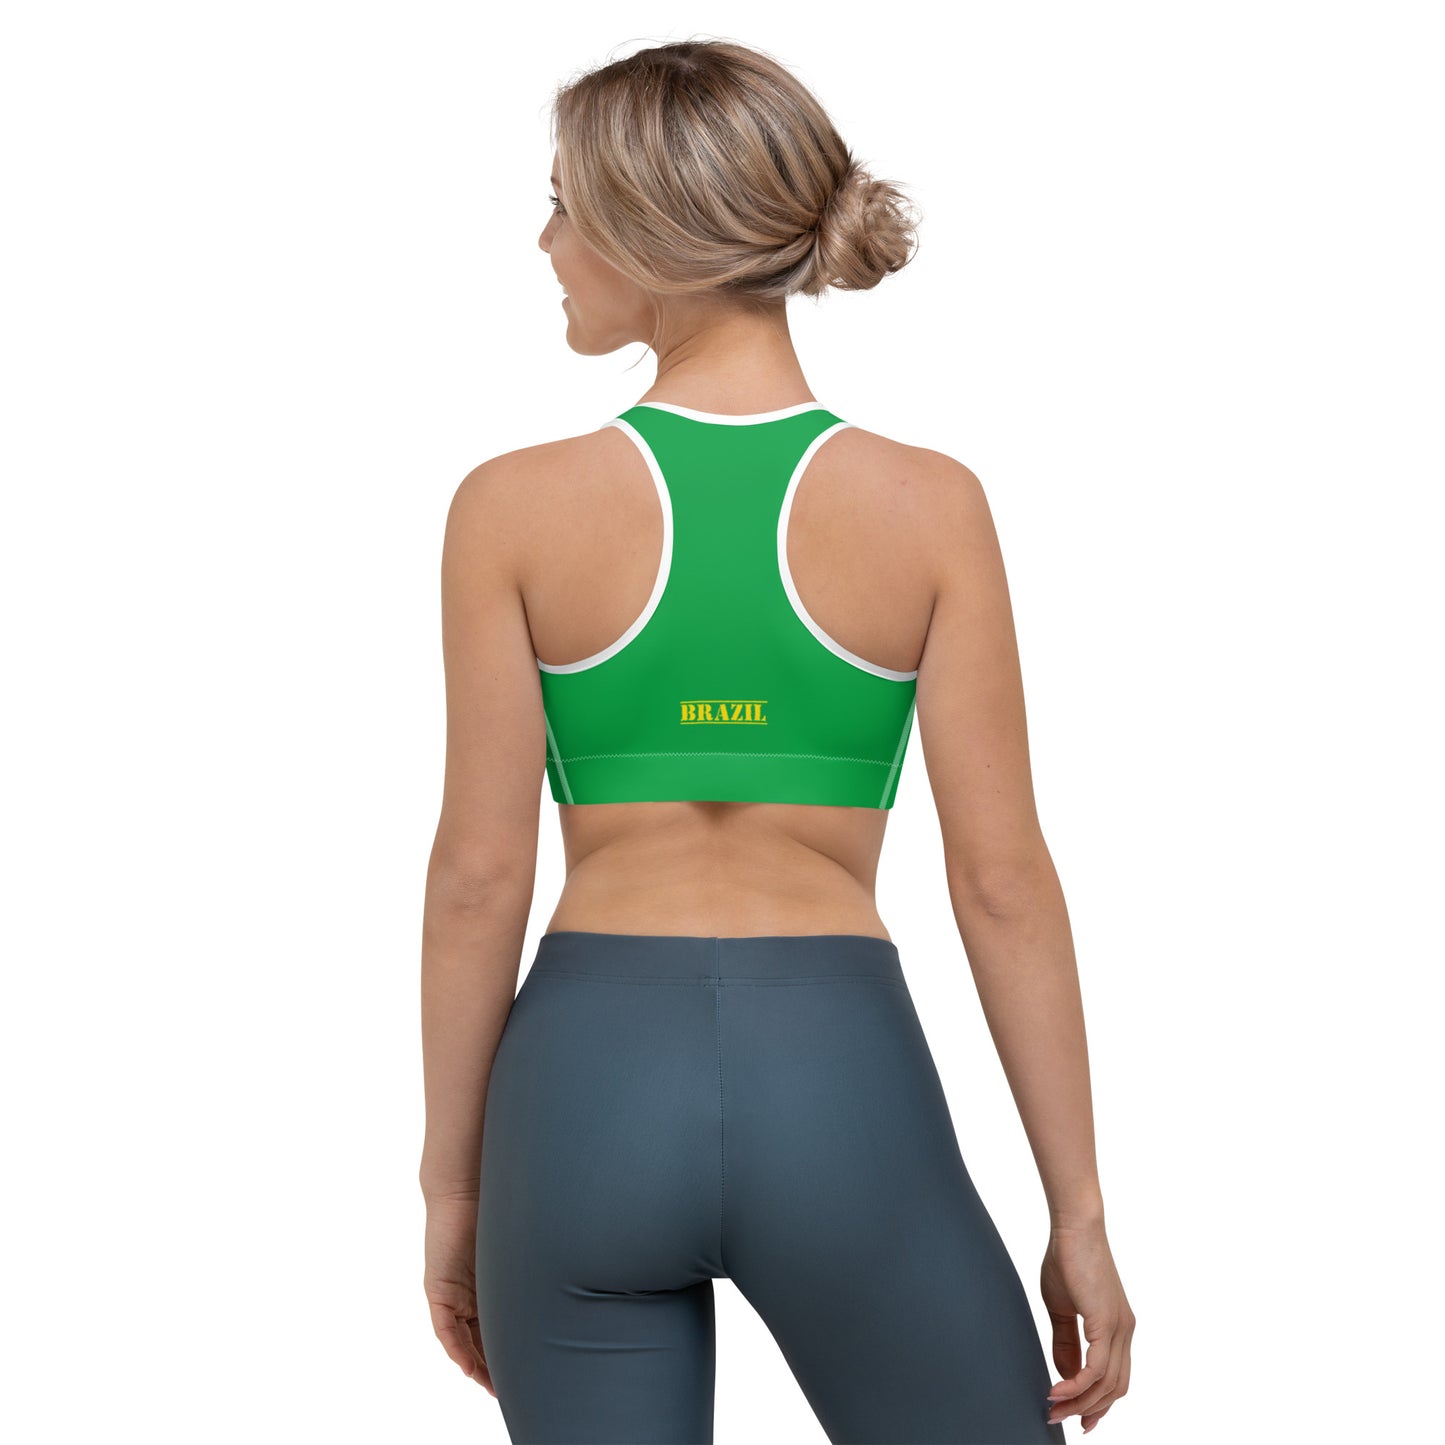 Brazil Flag Sports Bra Four-way Stretch / Workout Tops / Active Wear Outfit